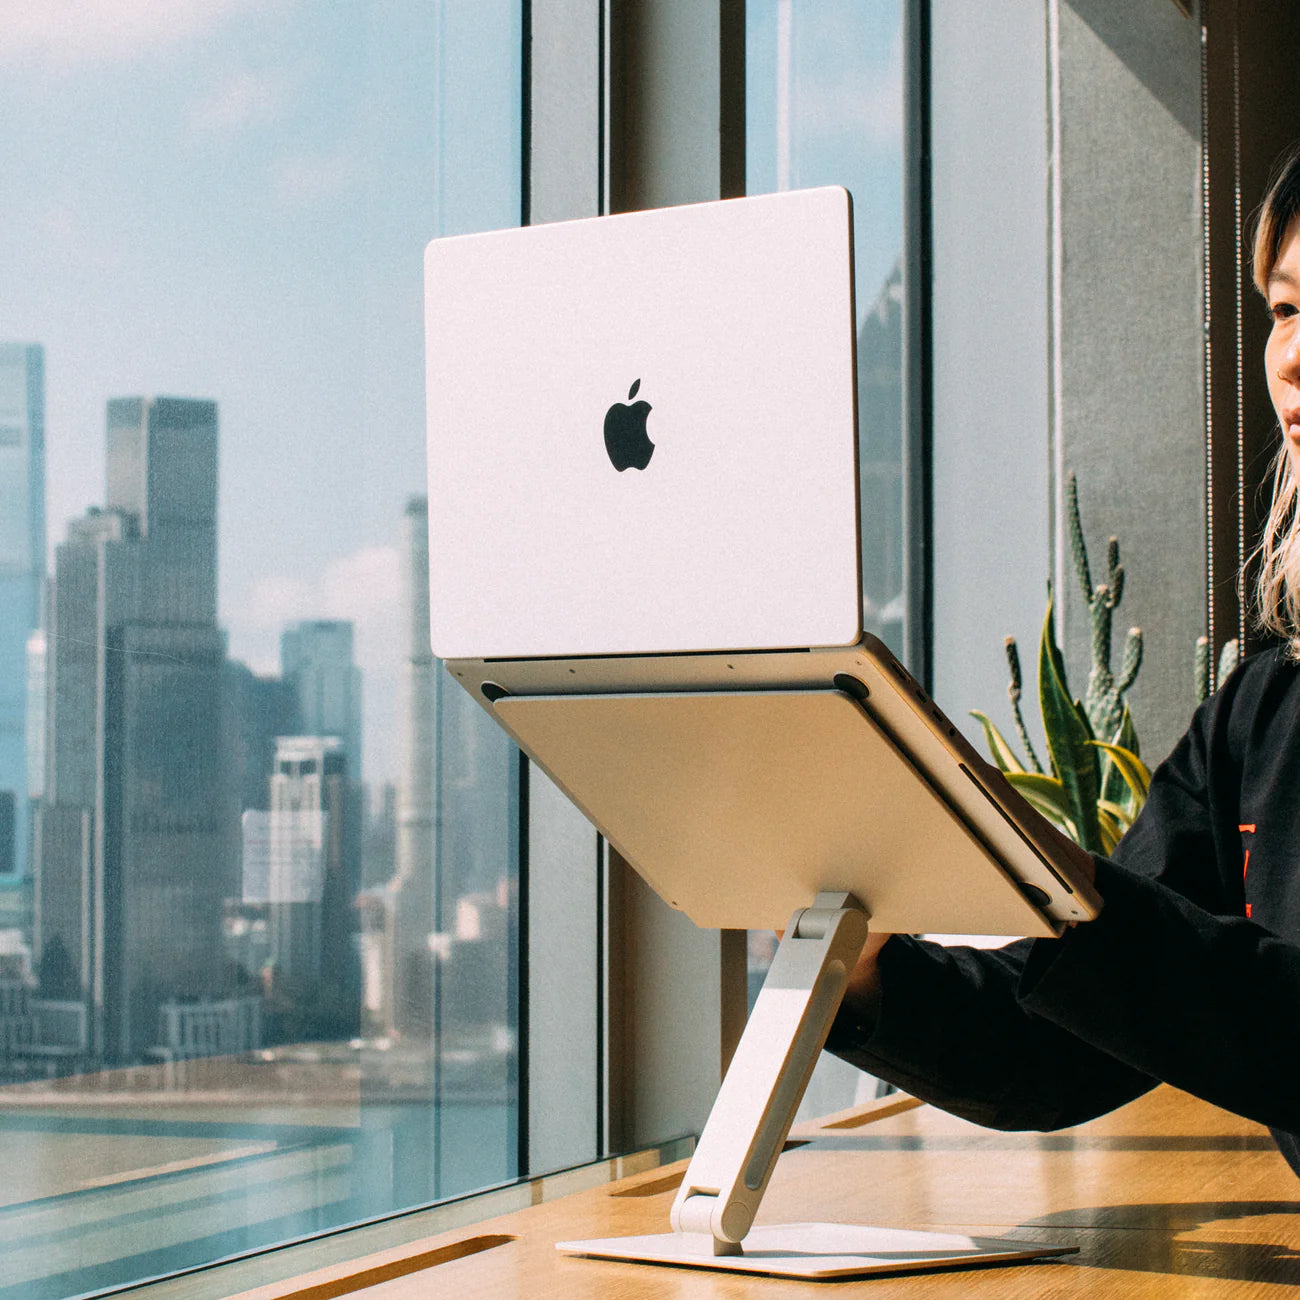 A Native Union Desk Laptop Stand in Sandstone with a MacBook on it and woman working